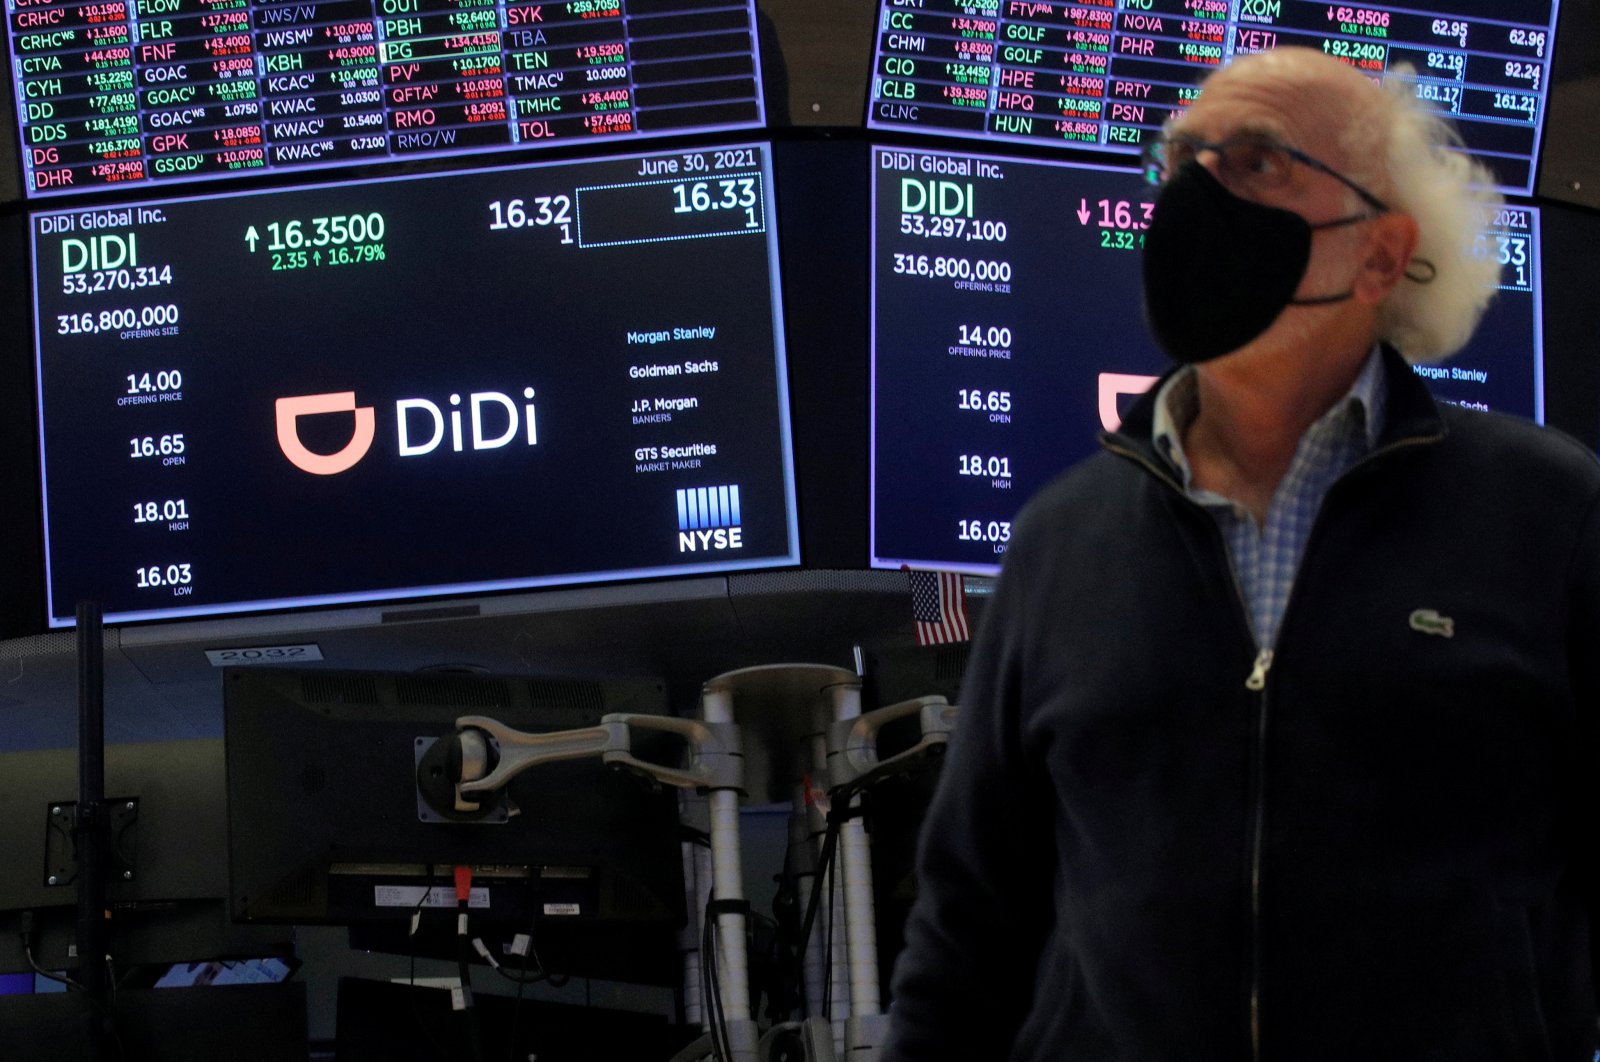 Traders work during the IPO for Chinese ride-hailing company Didi Global Inc on the New York Stock Exchange (NYSE) floor in New York City, U.S., June 30, 2021. (Reuters Photo)